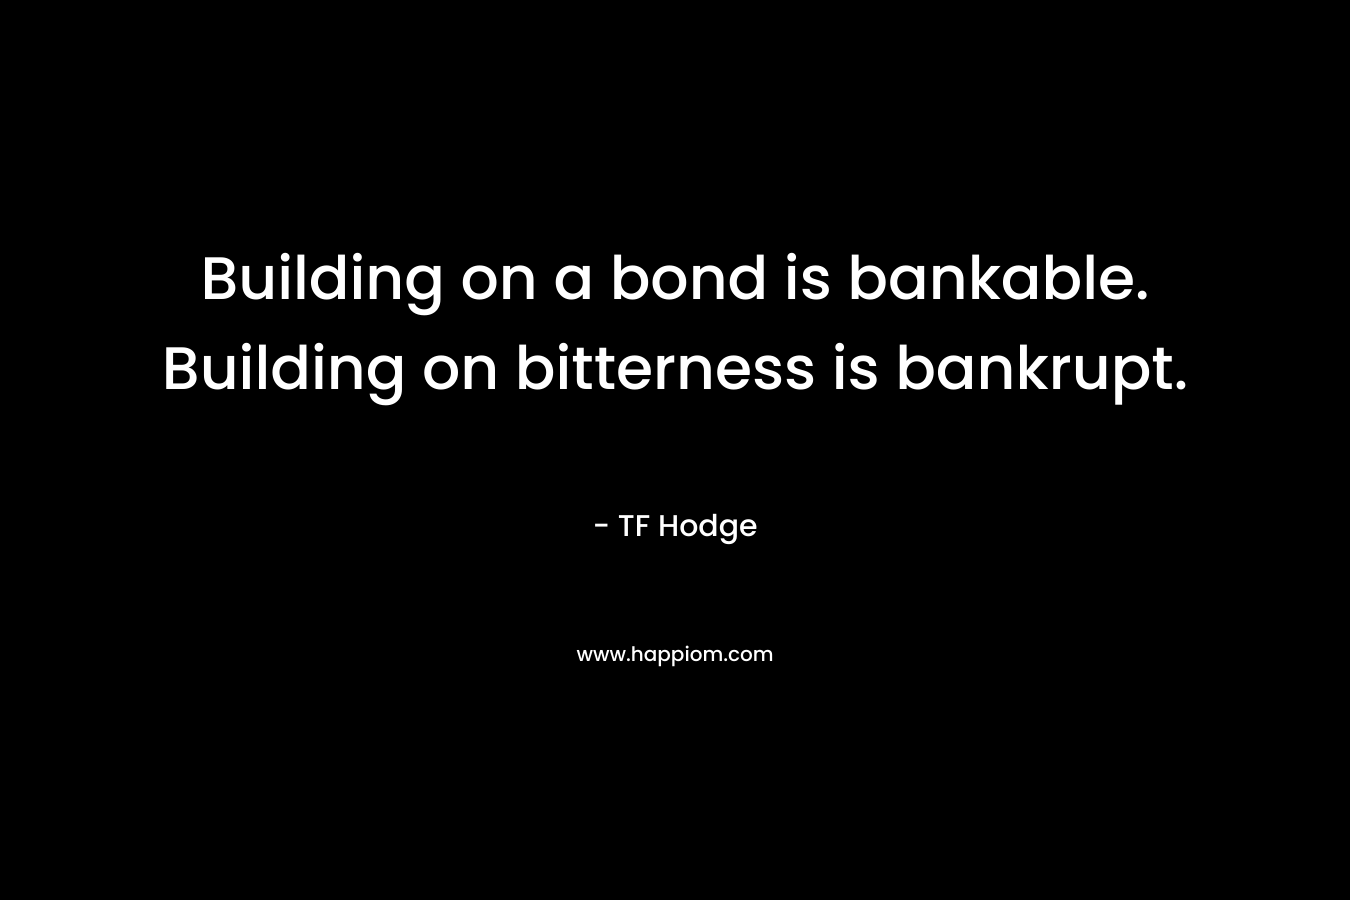 Building on a bond is bankable. Building on bitterness is bankrupt. – TF Hodge